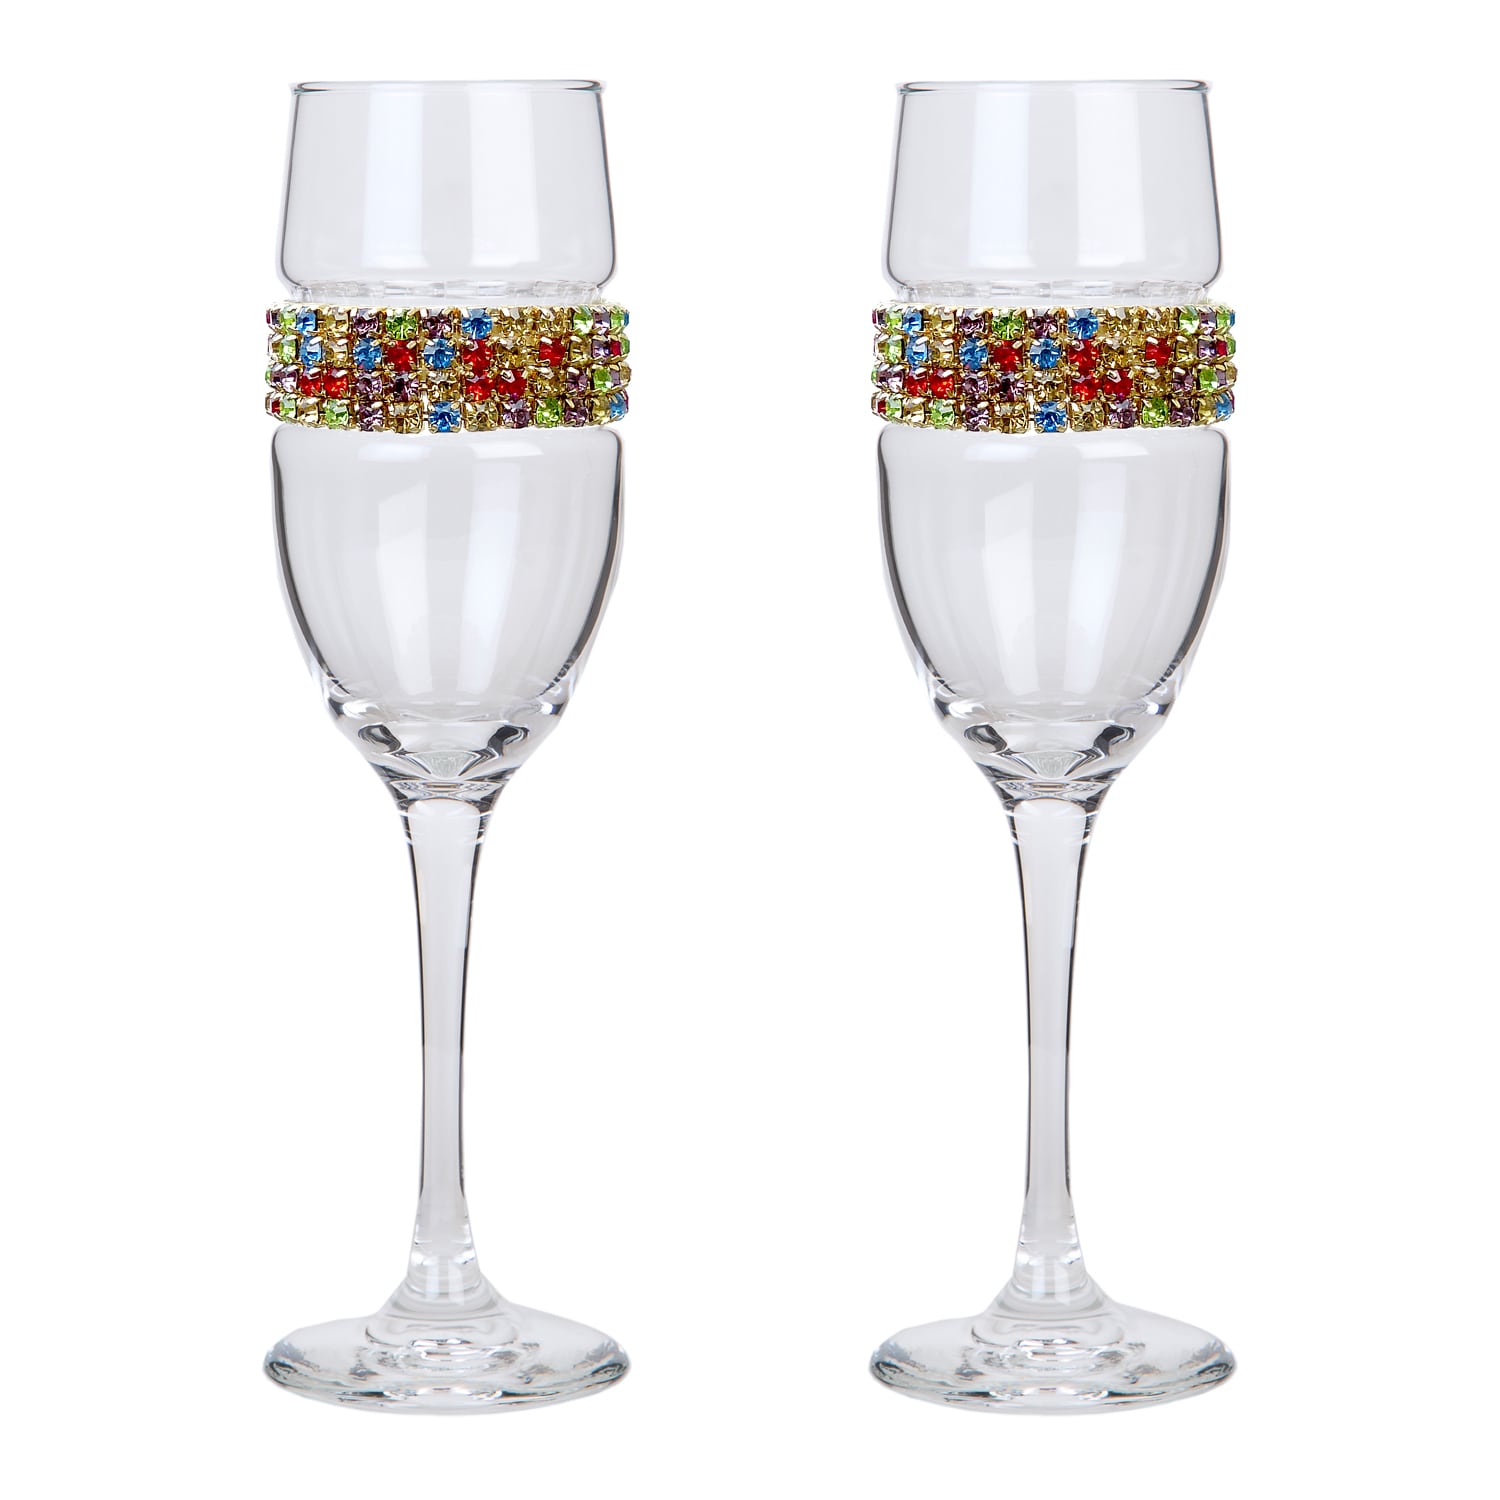 https://ak1.ostkcdn.com/images/products/15033300/Stemware-Designs-Shimmering-Wines-Glass-Confetti-Champagne-Flutes-Set-of-2-43c5175e-bb77-413b-9007-1674c859a3d2.jpg